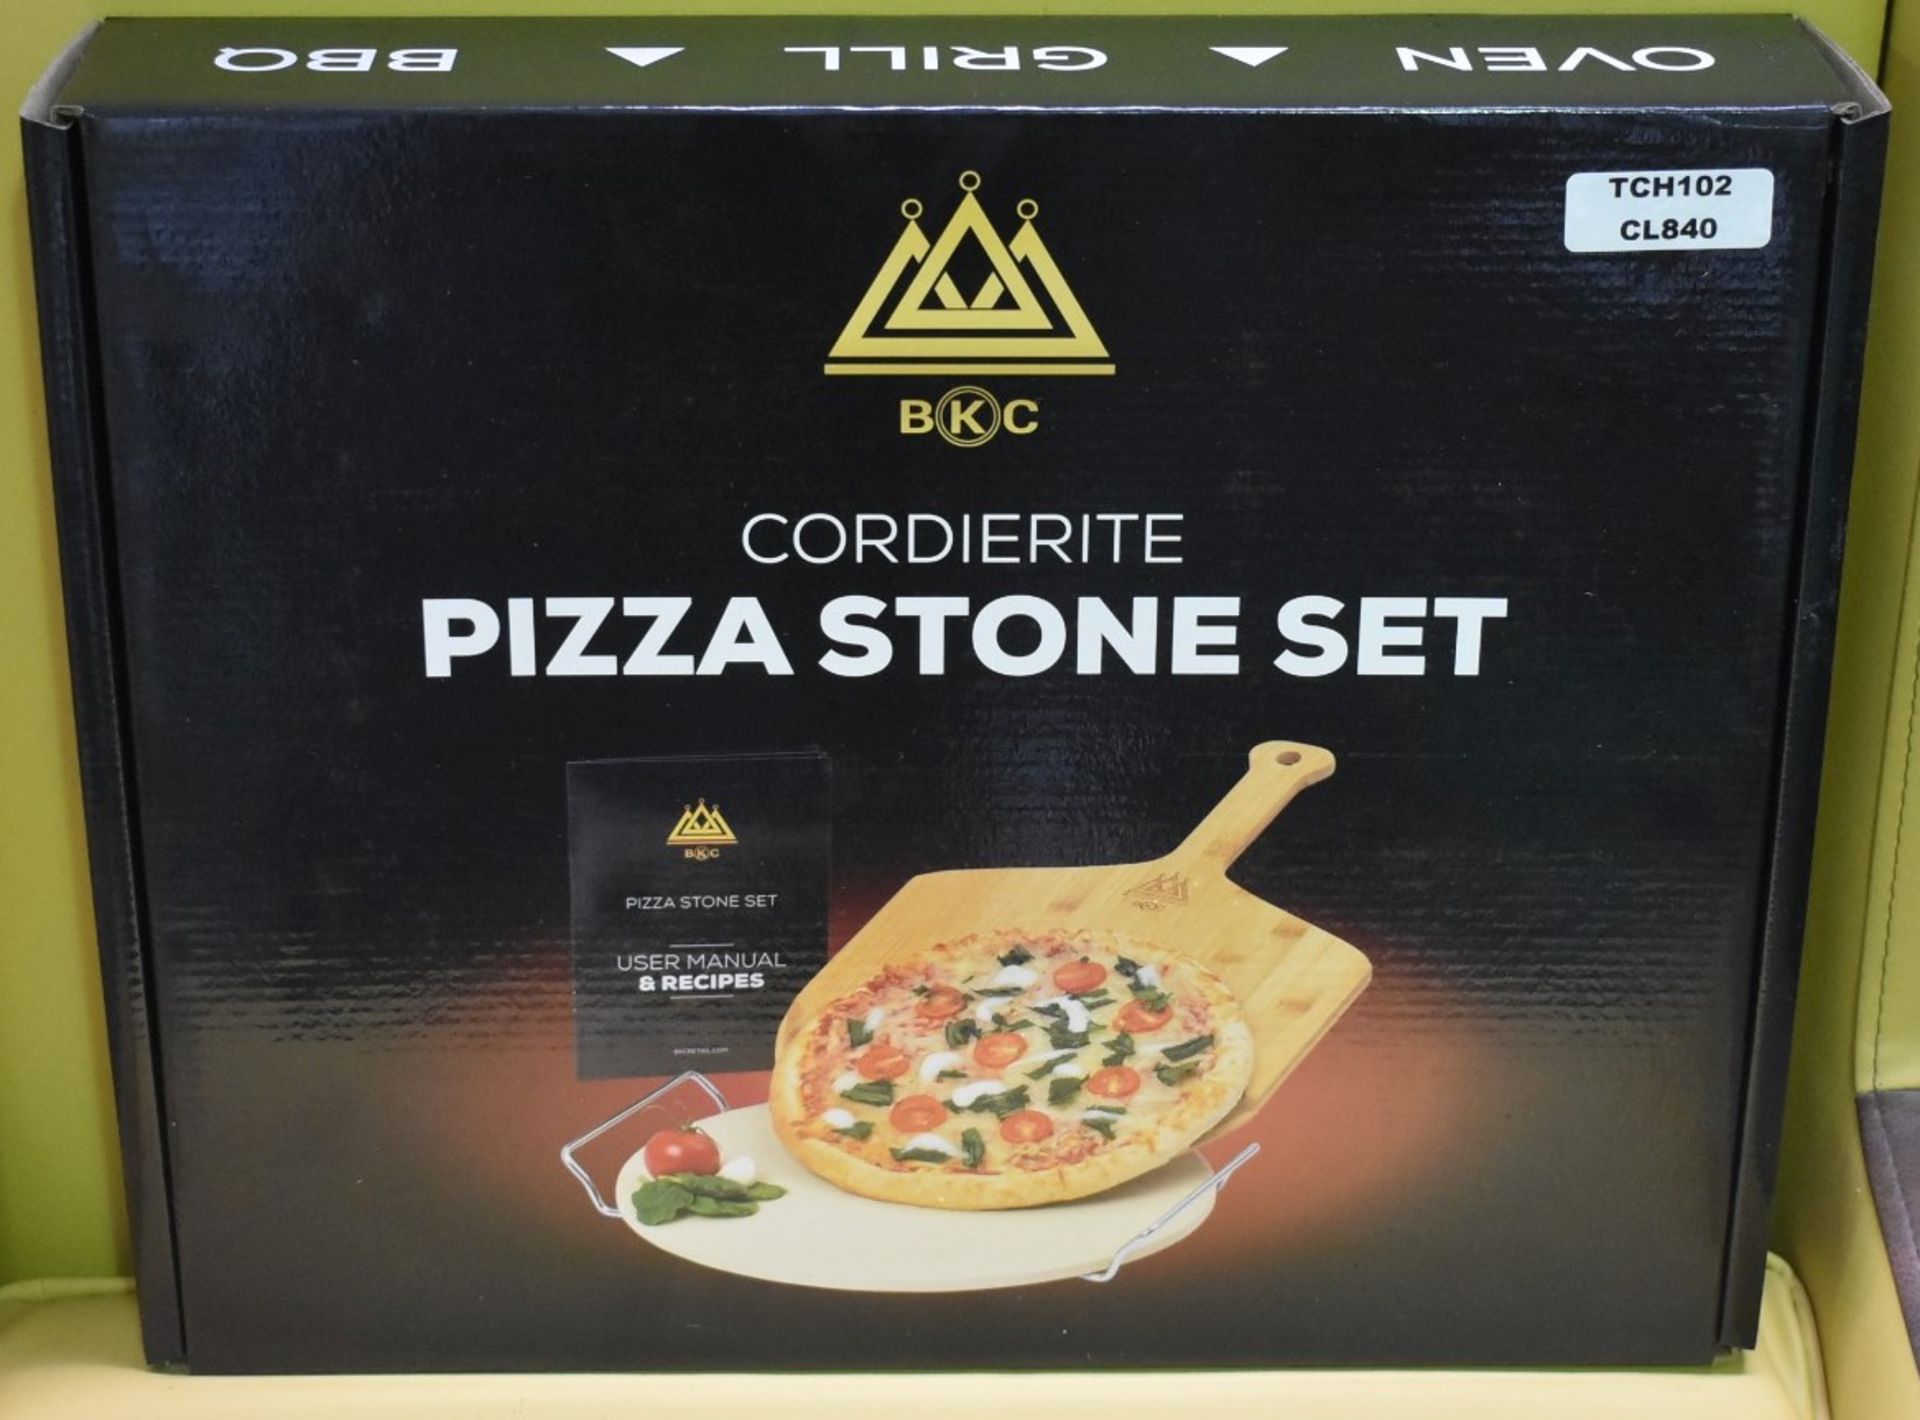 1 x BKC Cordierite Pizza Stone Set - Includes Pizza Stone, Paddle, Wire Rack and Recipe Manual - New - Image 4 of 6